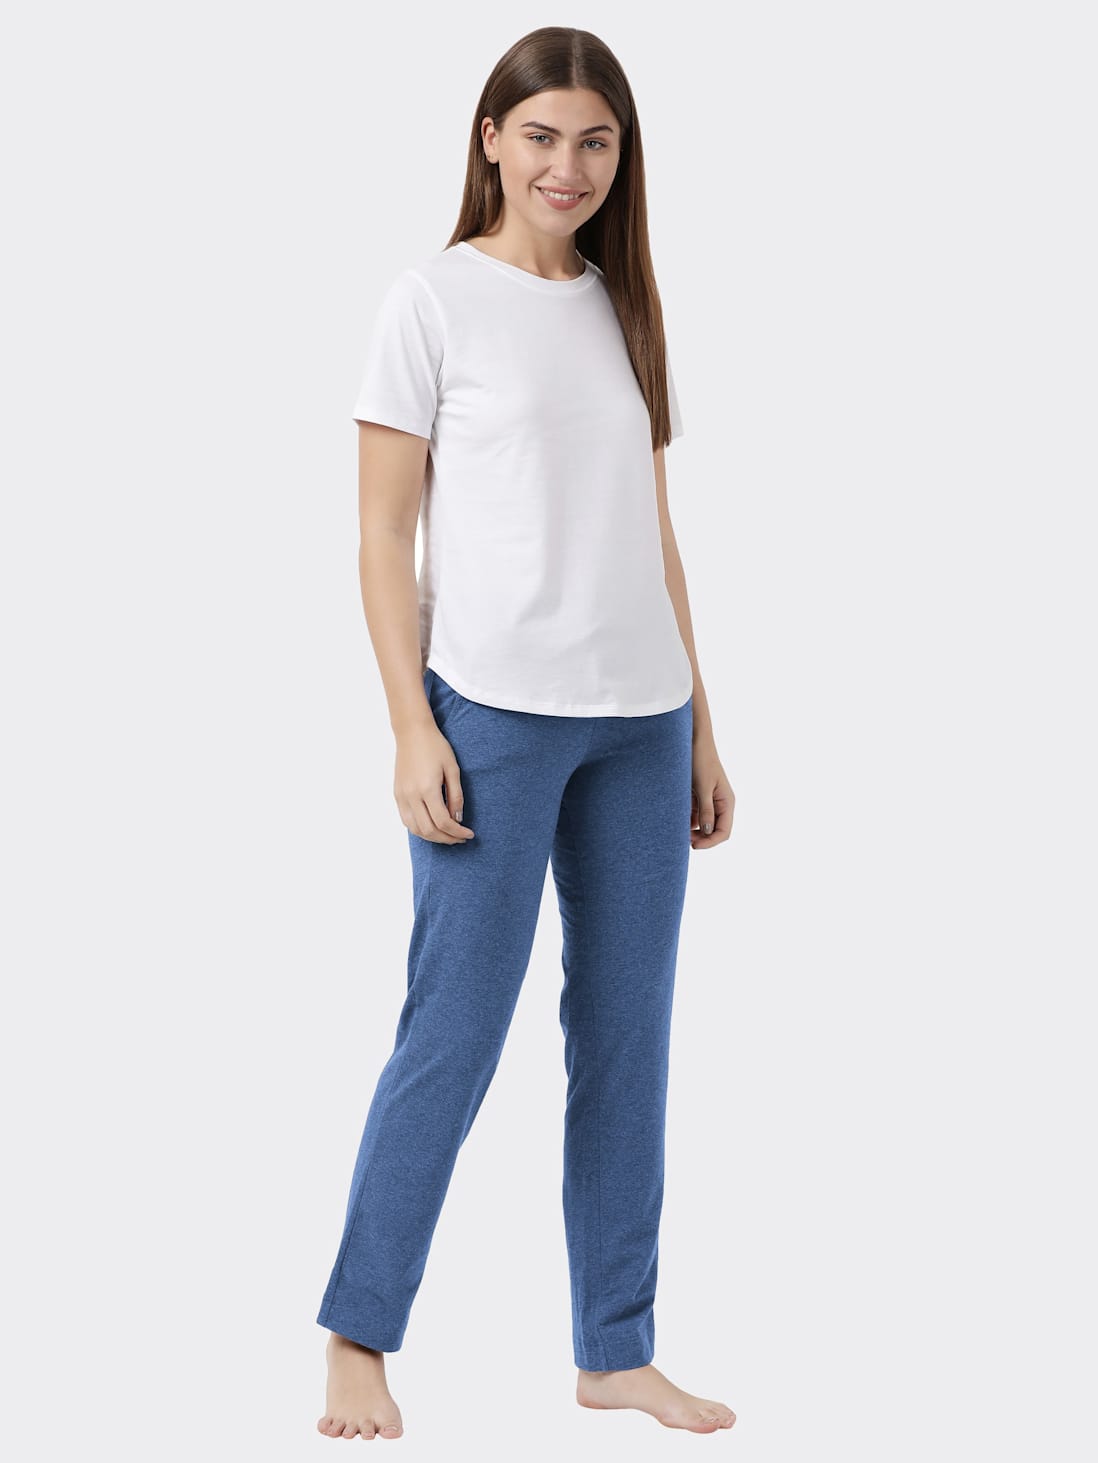 Jockey Rose Wine Track Pant for Women #1302 at Rs 879.00